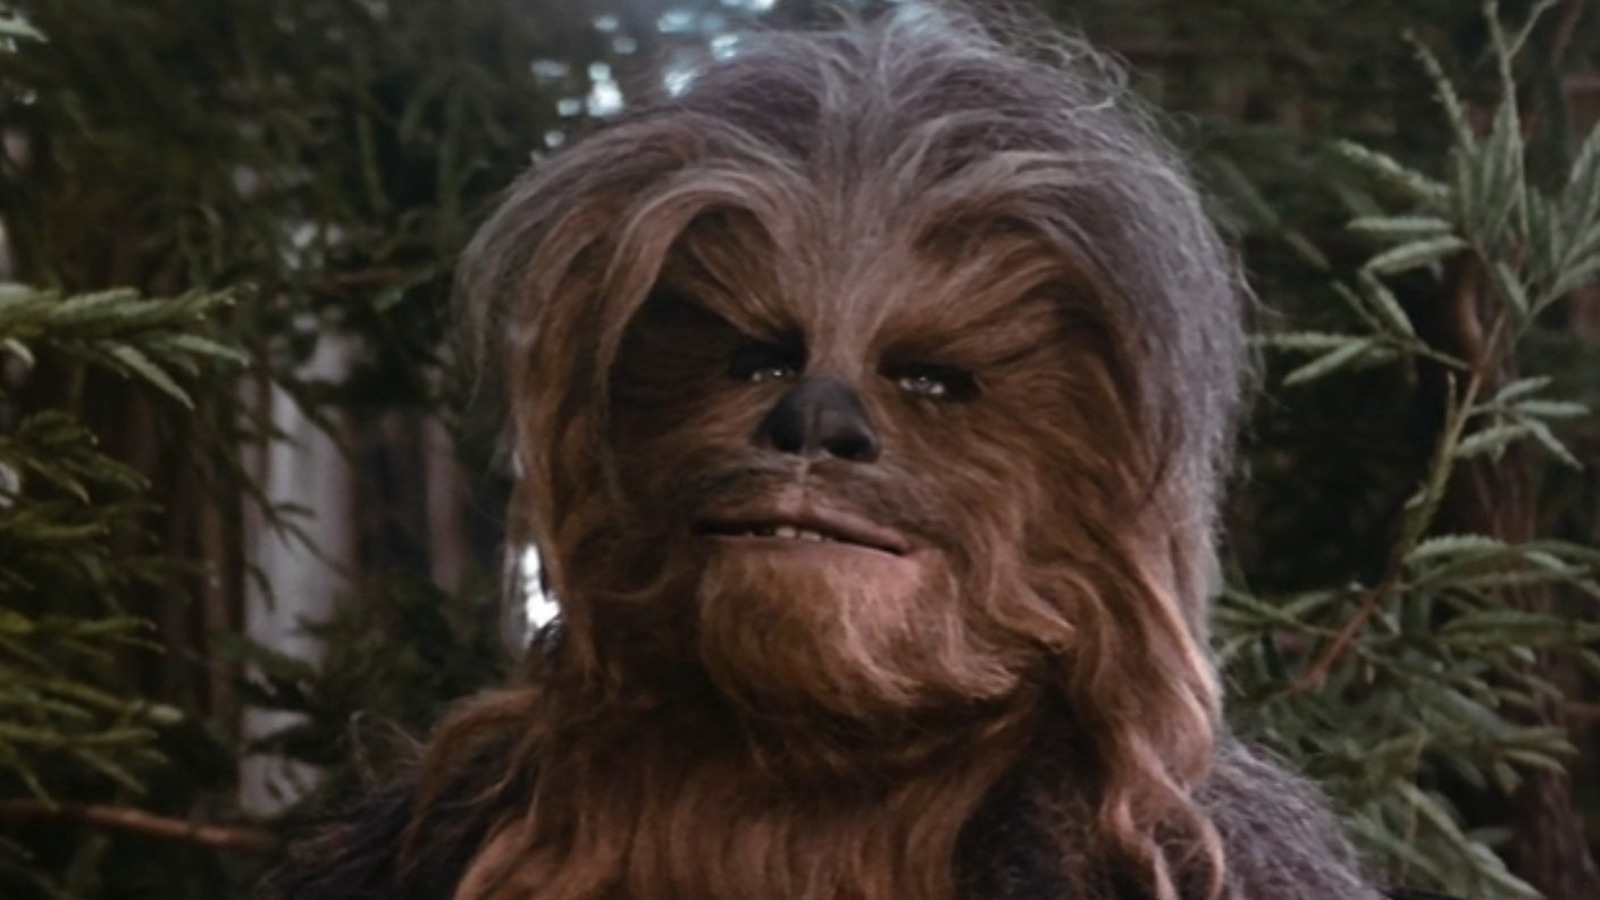 A Star Wars scene accidentally set Peter Mayhew and his Chewbacca costume on fire